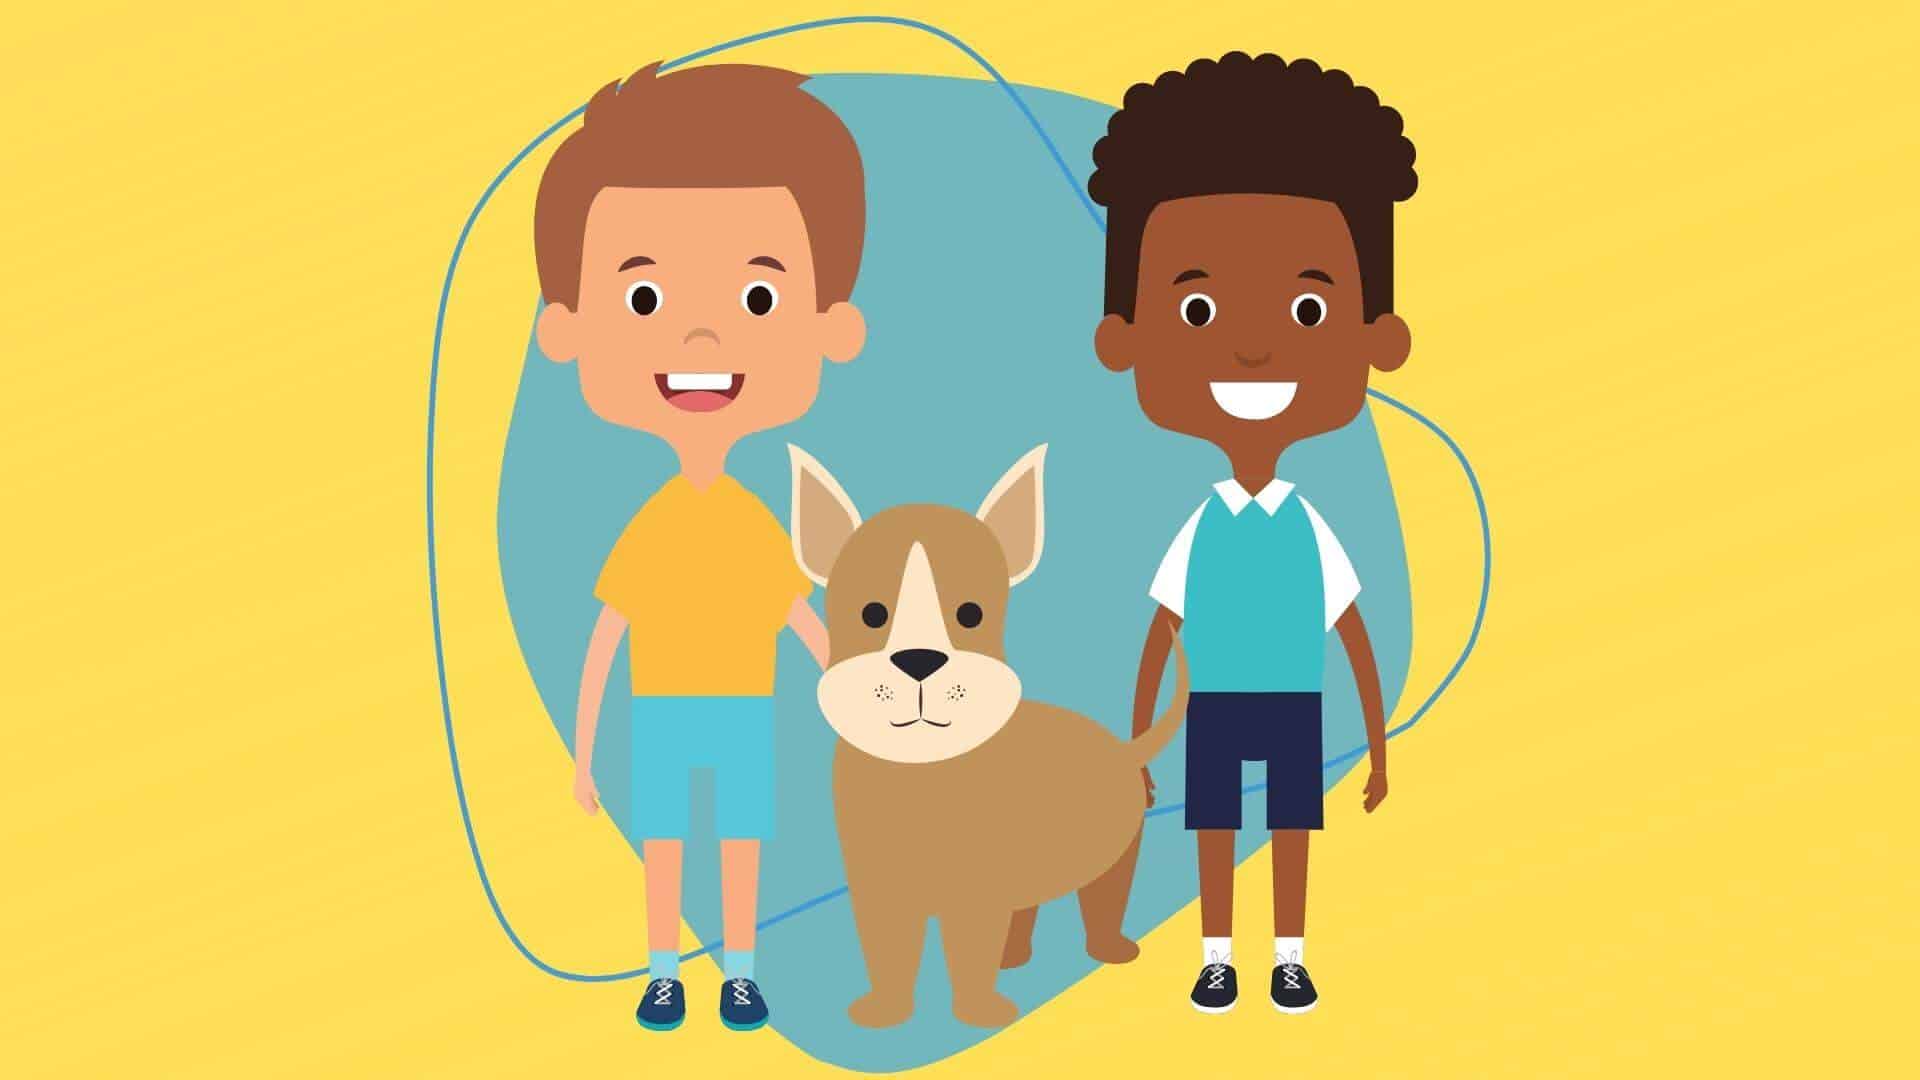 volunteer jobs for kids graphic of two young boys with a dog
